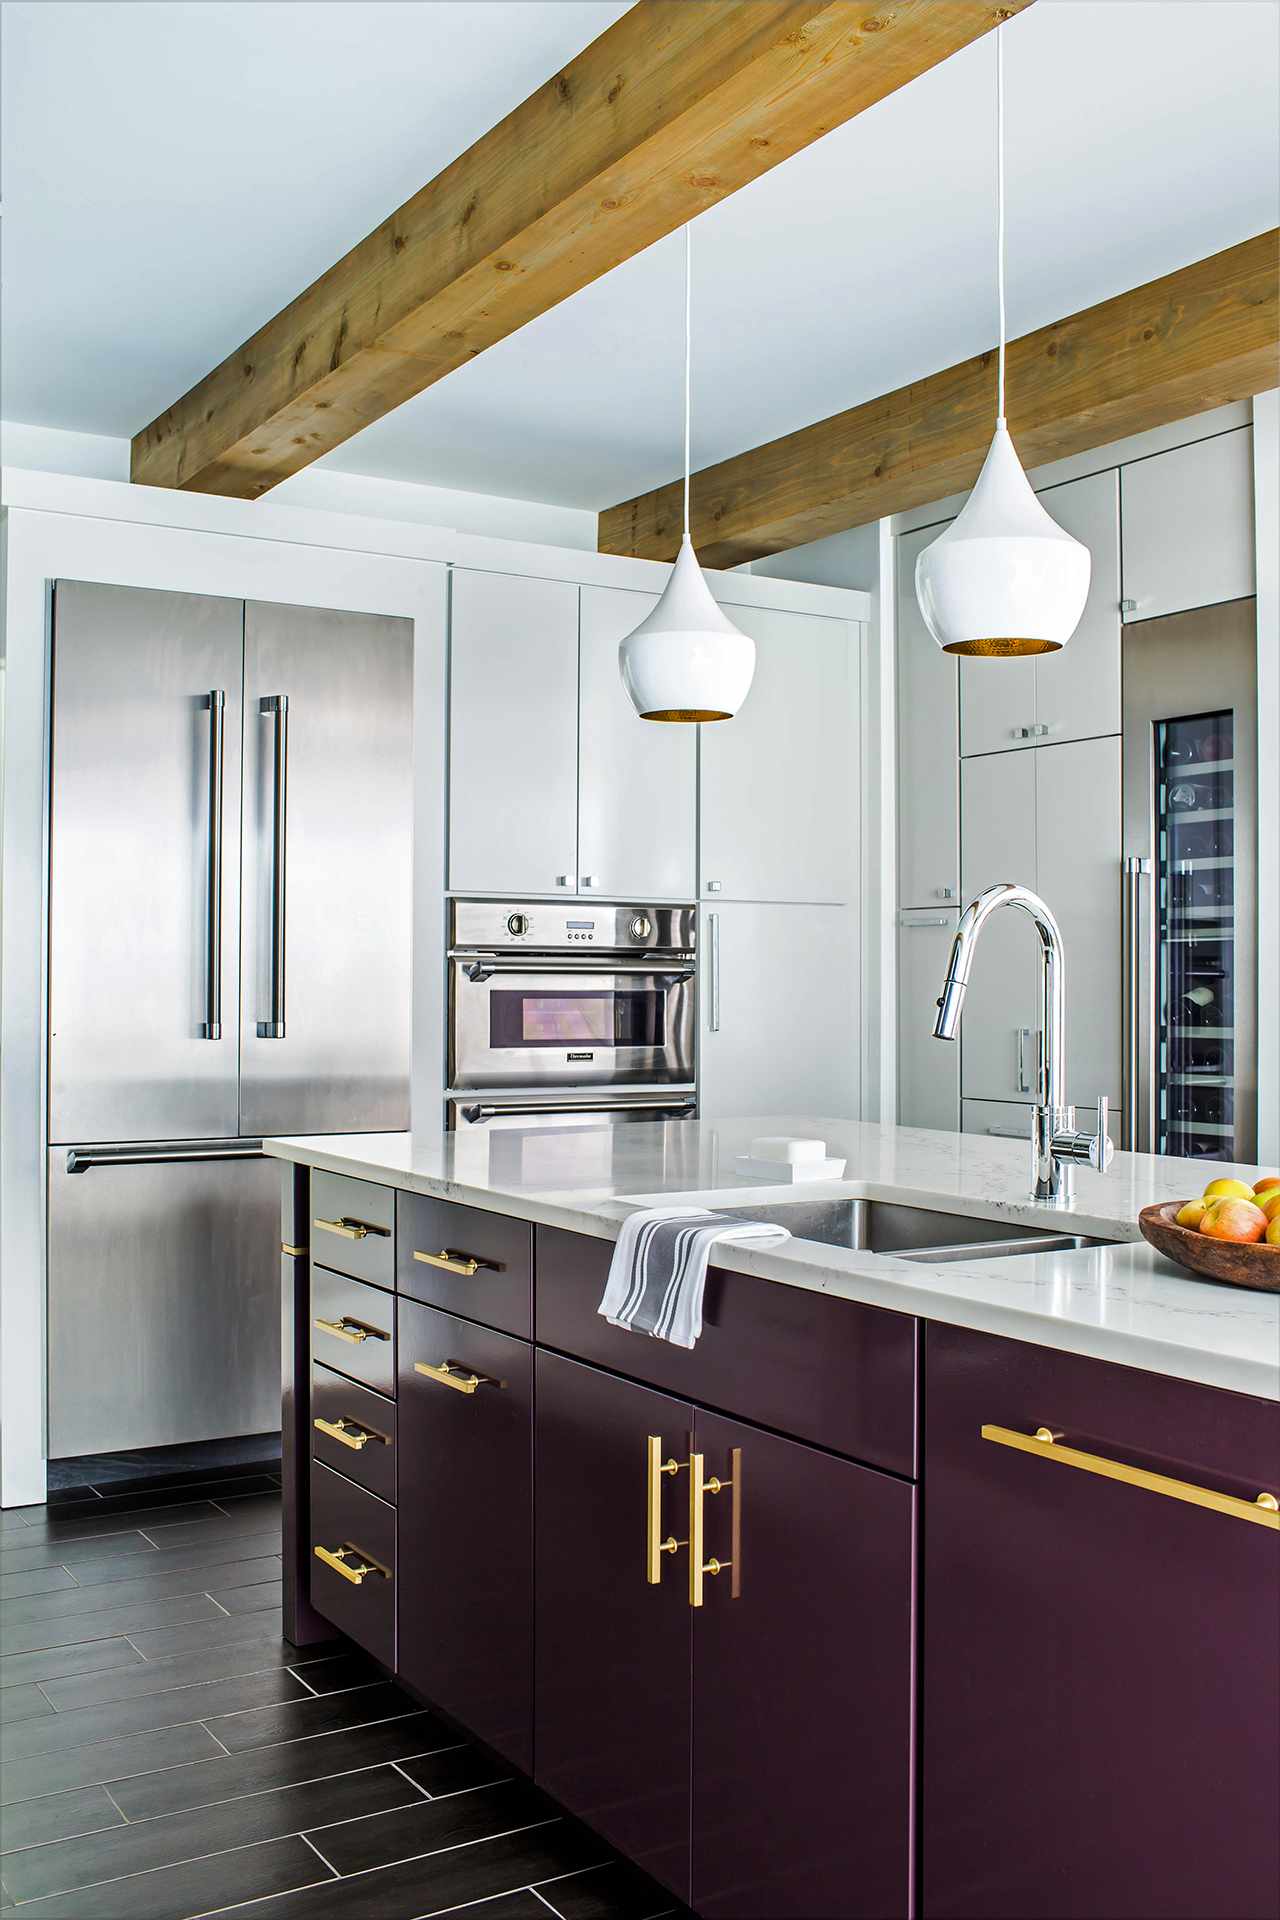 22 Kitchen Cabinetry Trends You Ll Love, What Is The Latest Look In Kitchen Cabinets